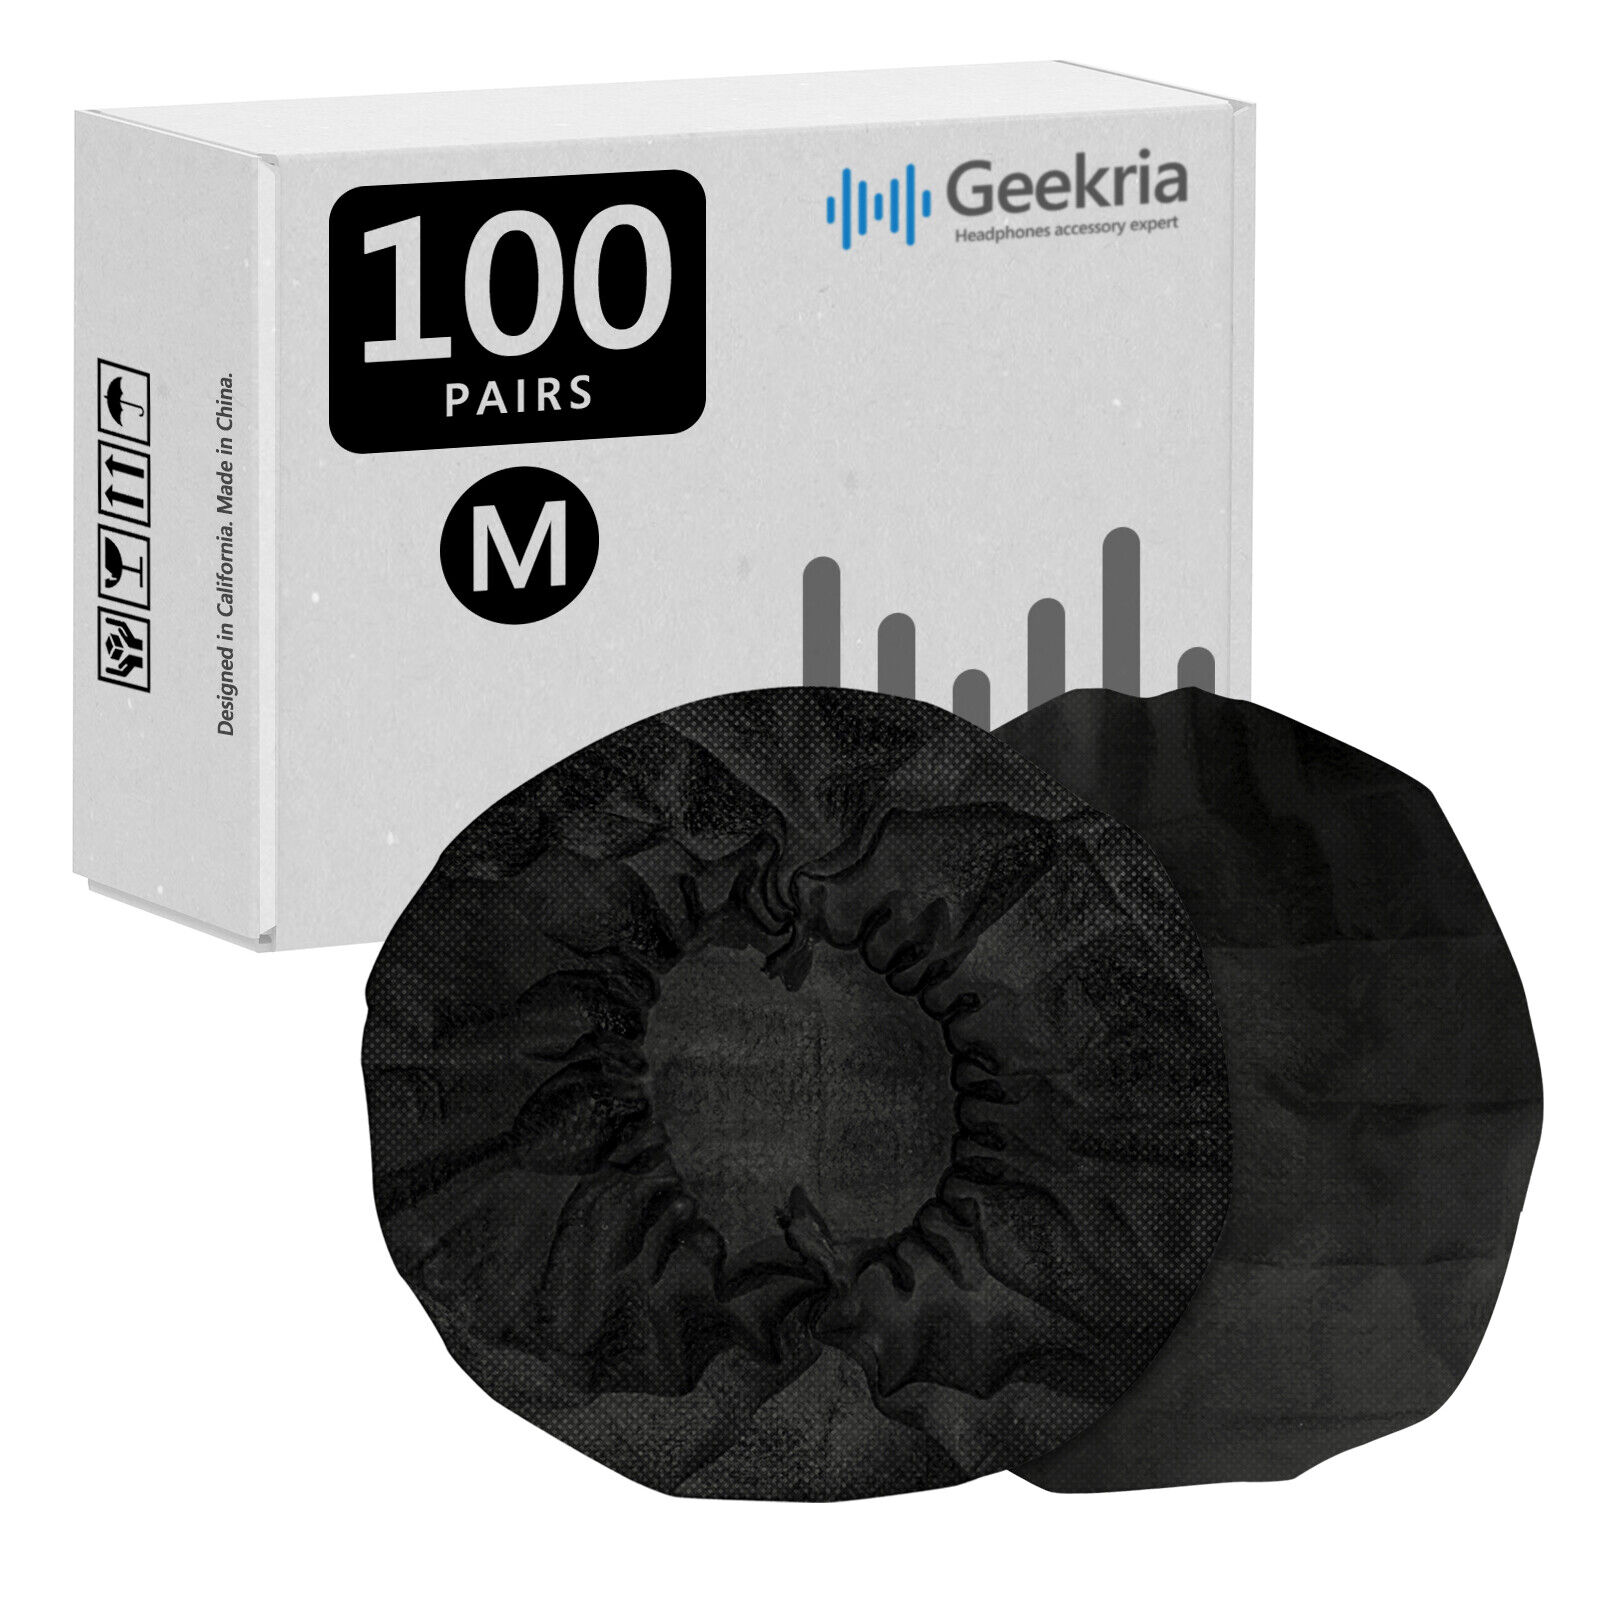 Geekria 100 Pairs Disposable Headphone Covers Fits 3.14"-4.33" Headsets (black)